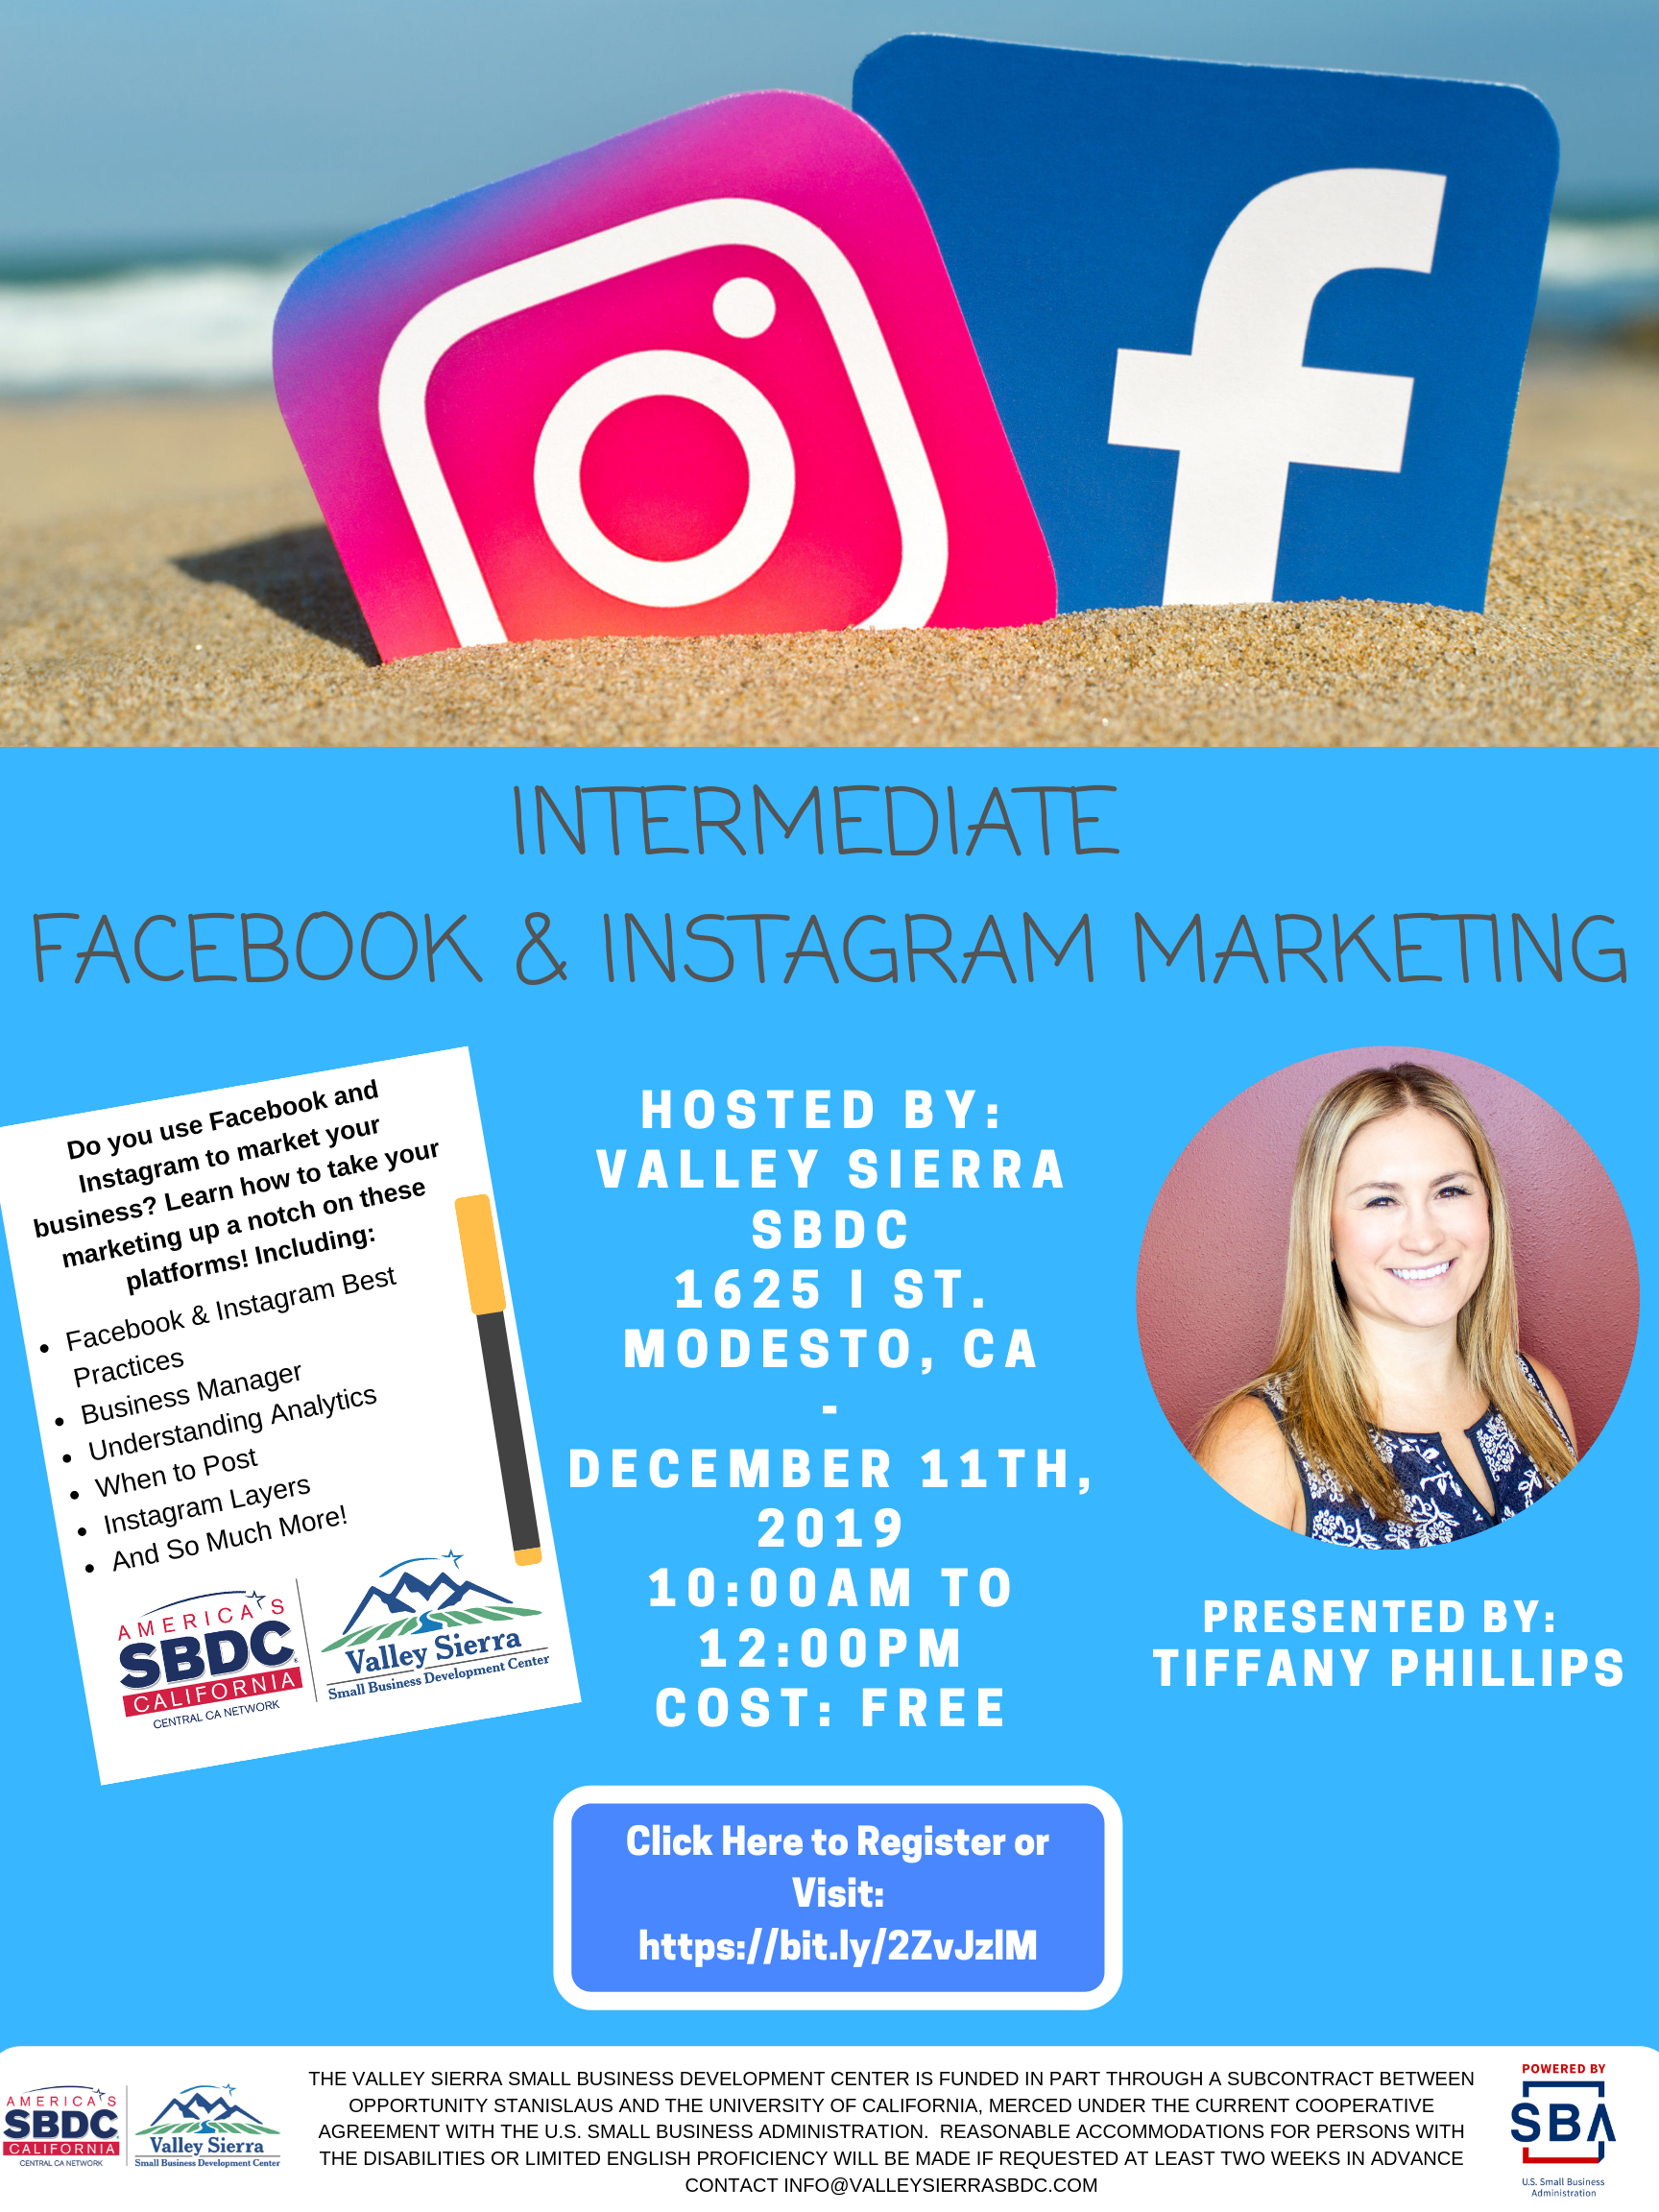 Event Flyer, INTERMEDIATE FACEBOOK/INSTAGRAM MARKETING Do you use Facebook and Instagram to market your business? Learn how to take your marketing up a notch on these platforms! Including: Facebook & Instagram Best Practices Business Manager Understanding Analytics When to Post Instagram Layers And So Much More! Hosted by Valley Sierra SBDC, 1625 I Street, Modesto, CA. December 11th, 2019, 10:00am to 12:00pm. Cost is Free!